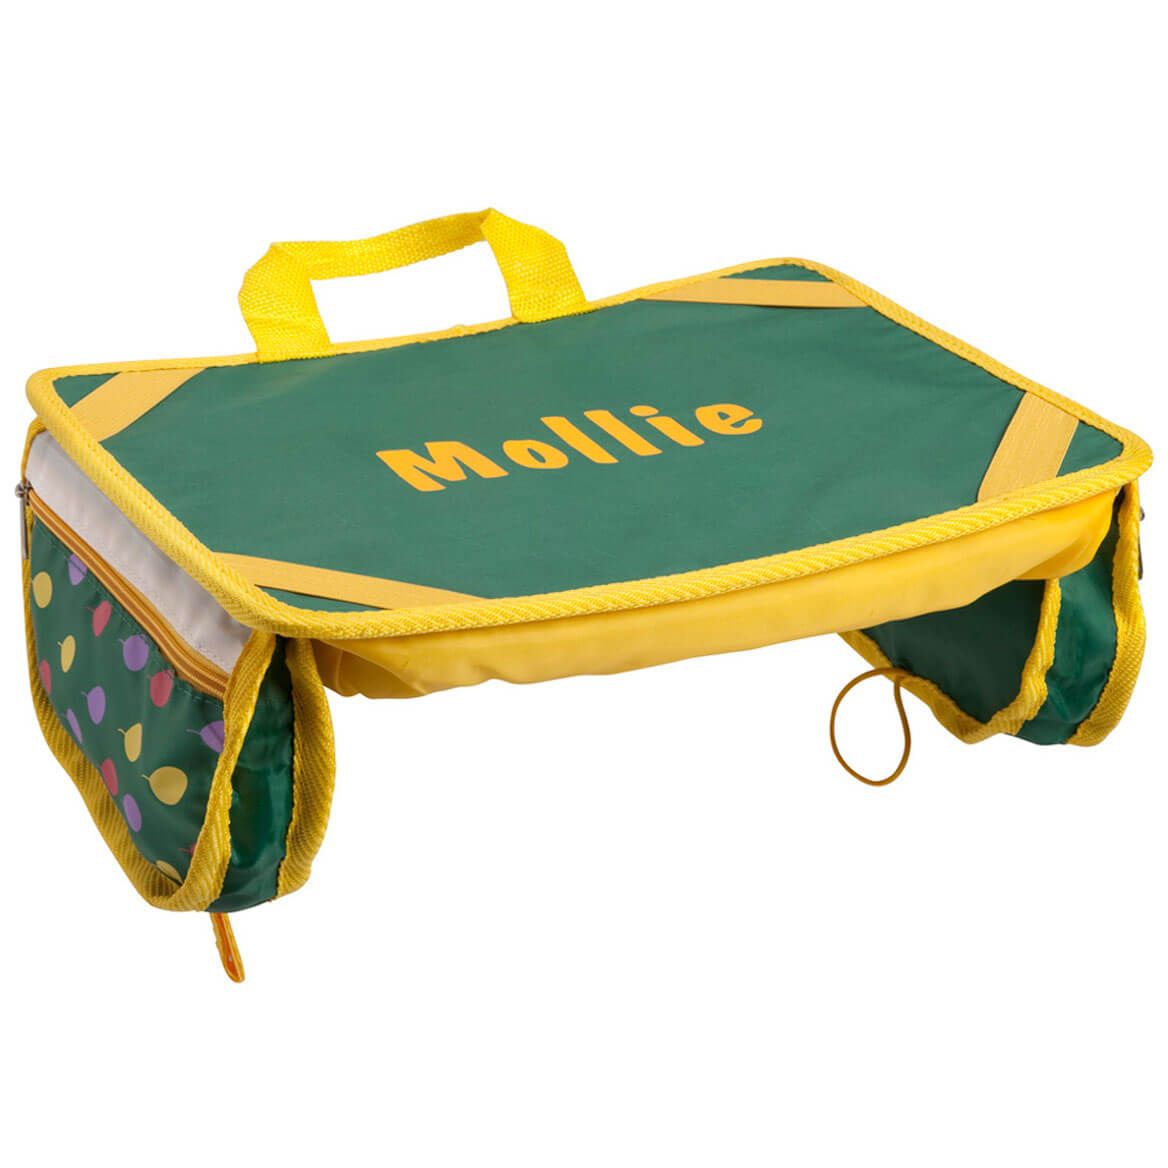 Personalized Lap Desk For Kids + '-' + 339641